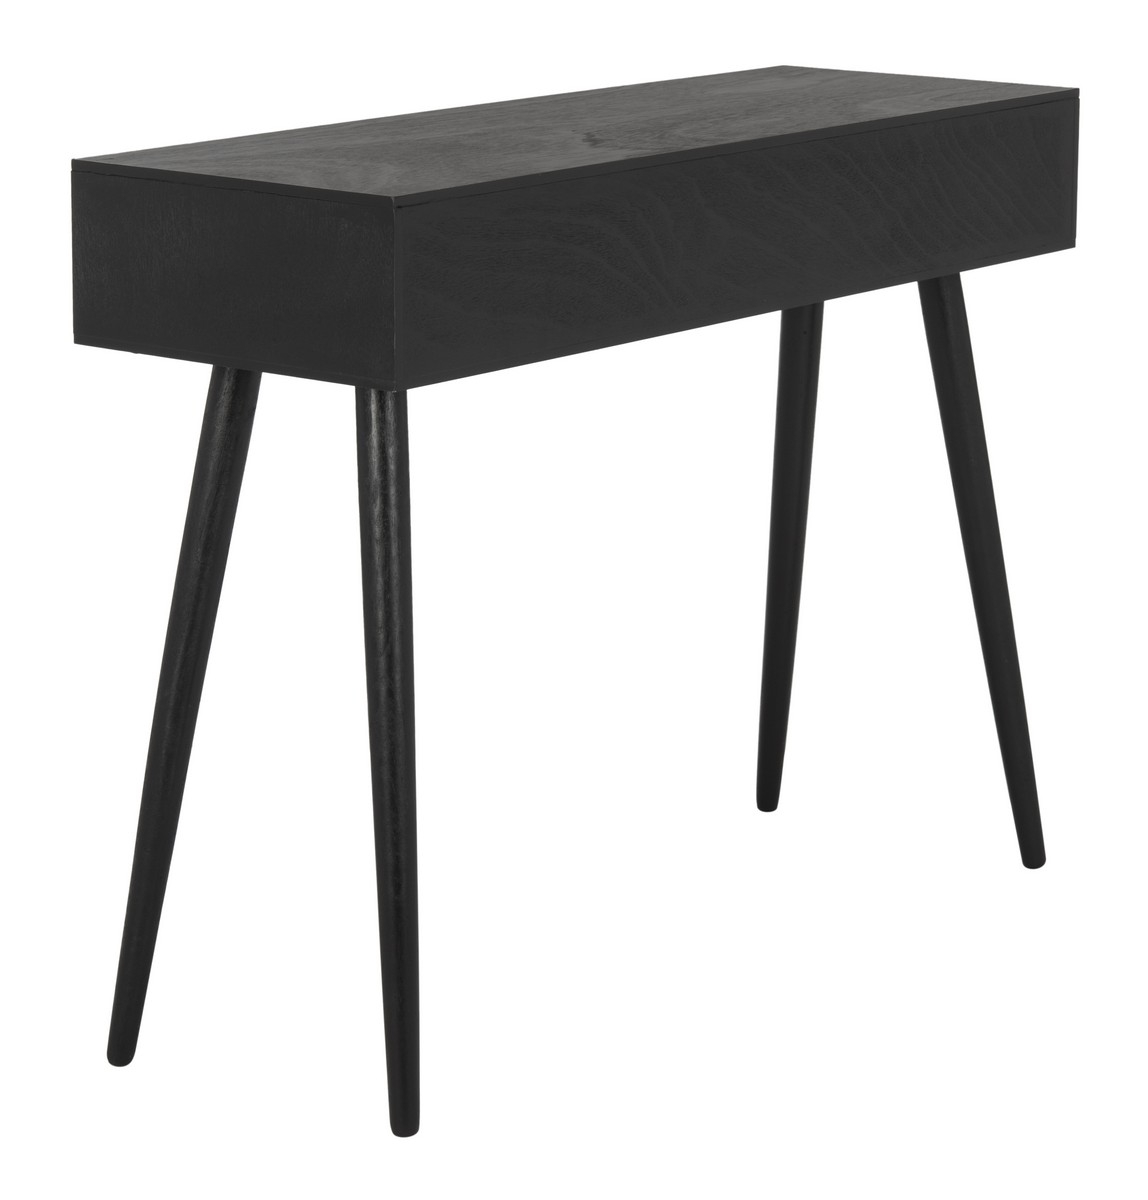 Albus 3 Drawer Console Table - Black - Arlo Home - Image 4